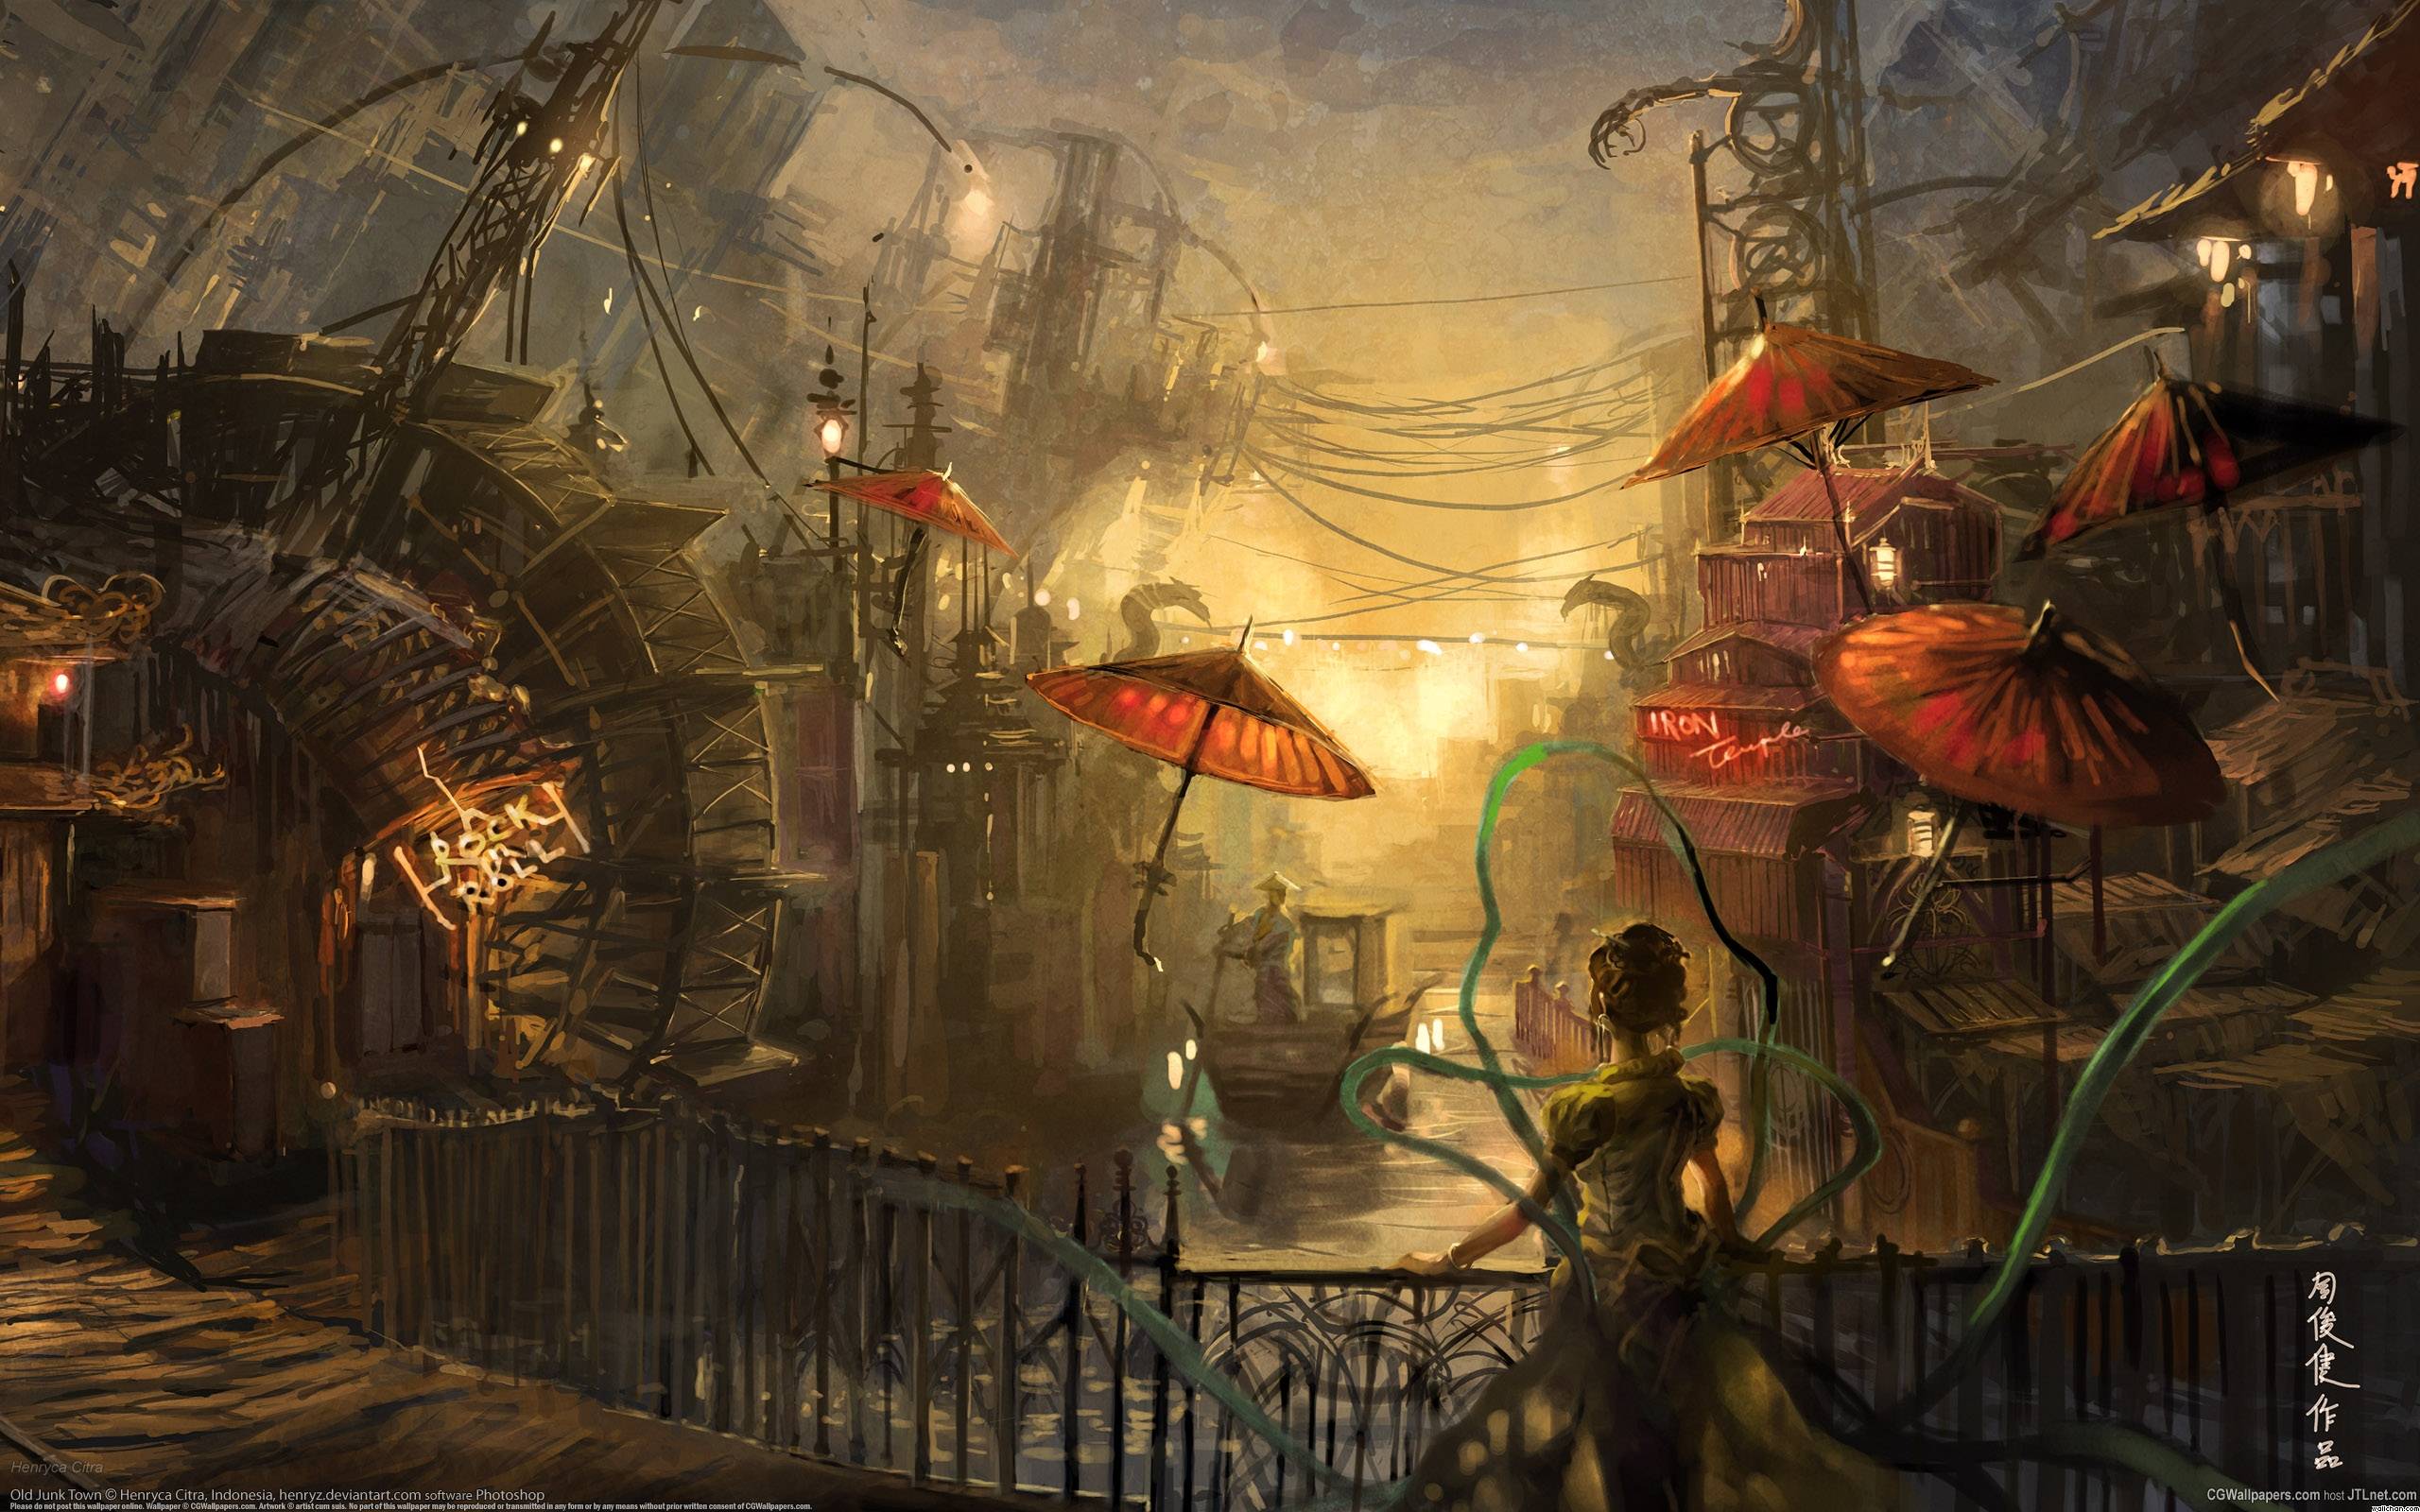 steampunk wallpaper 5. Image And Wallpaper free